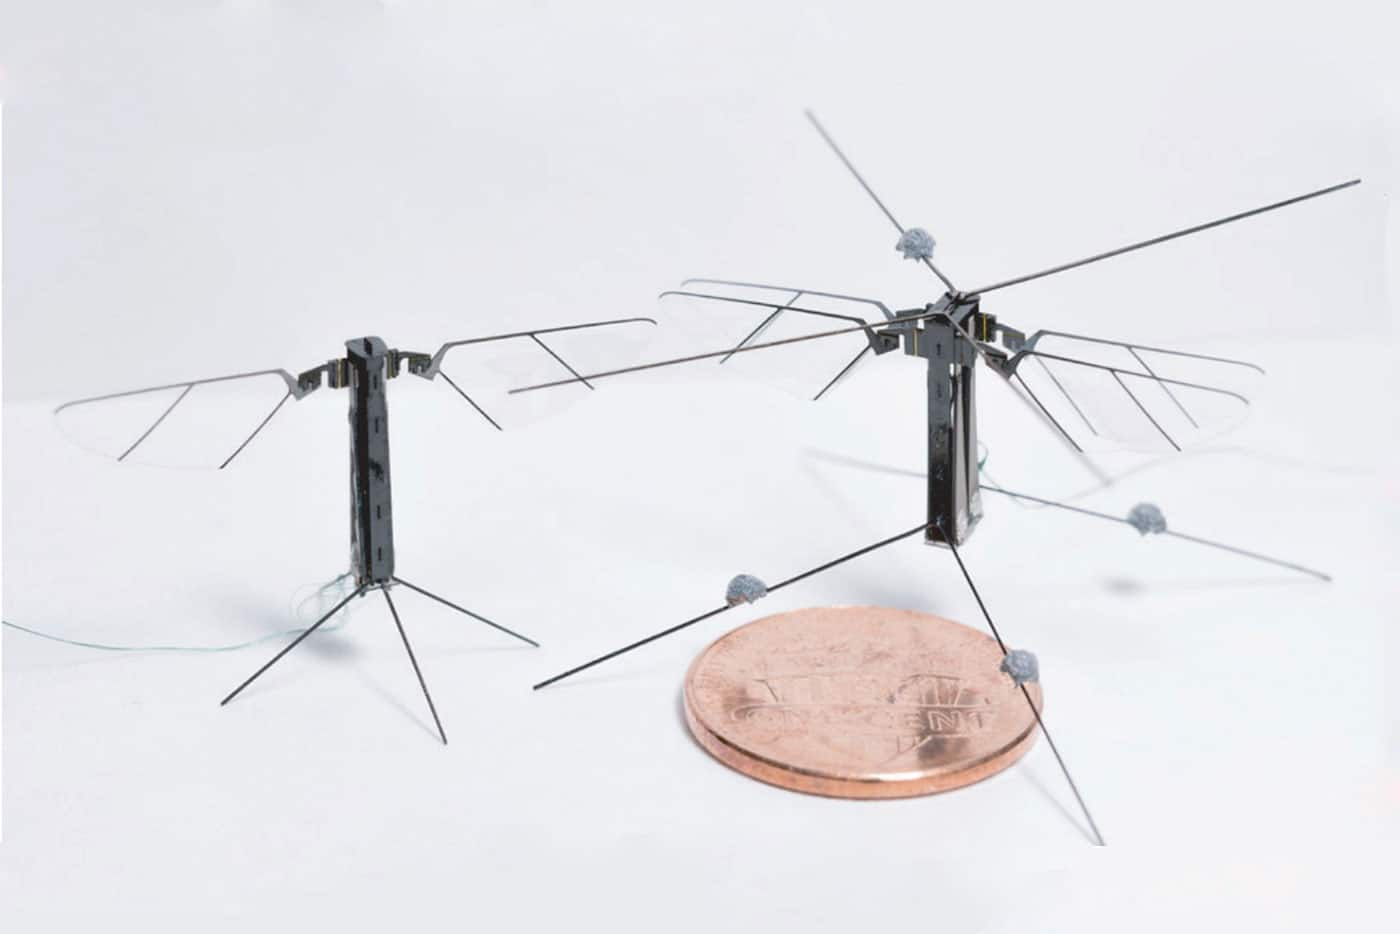 Bee+: A tiny four-winged robotic insect